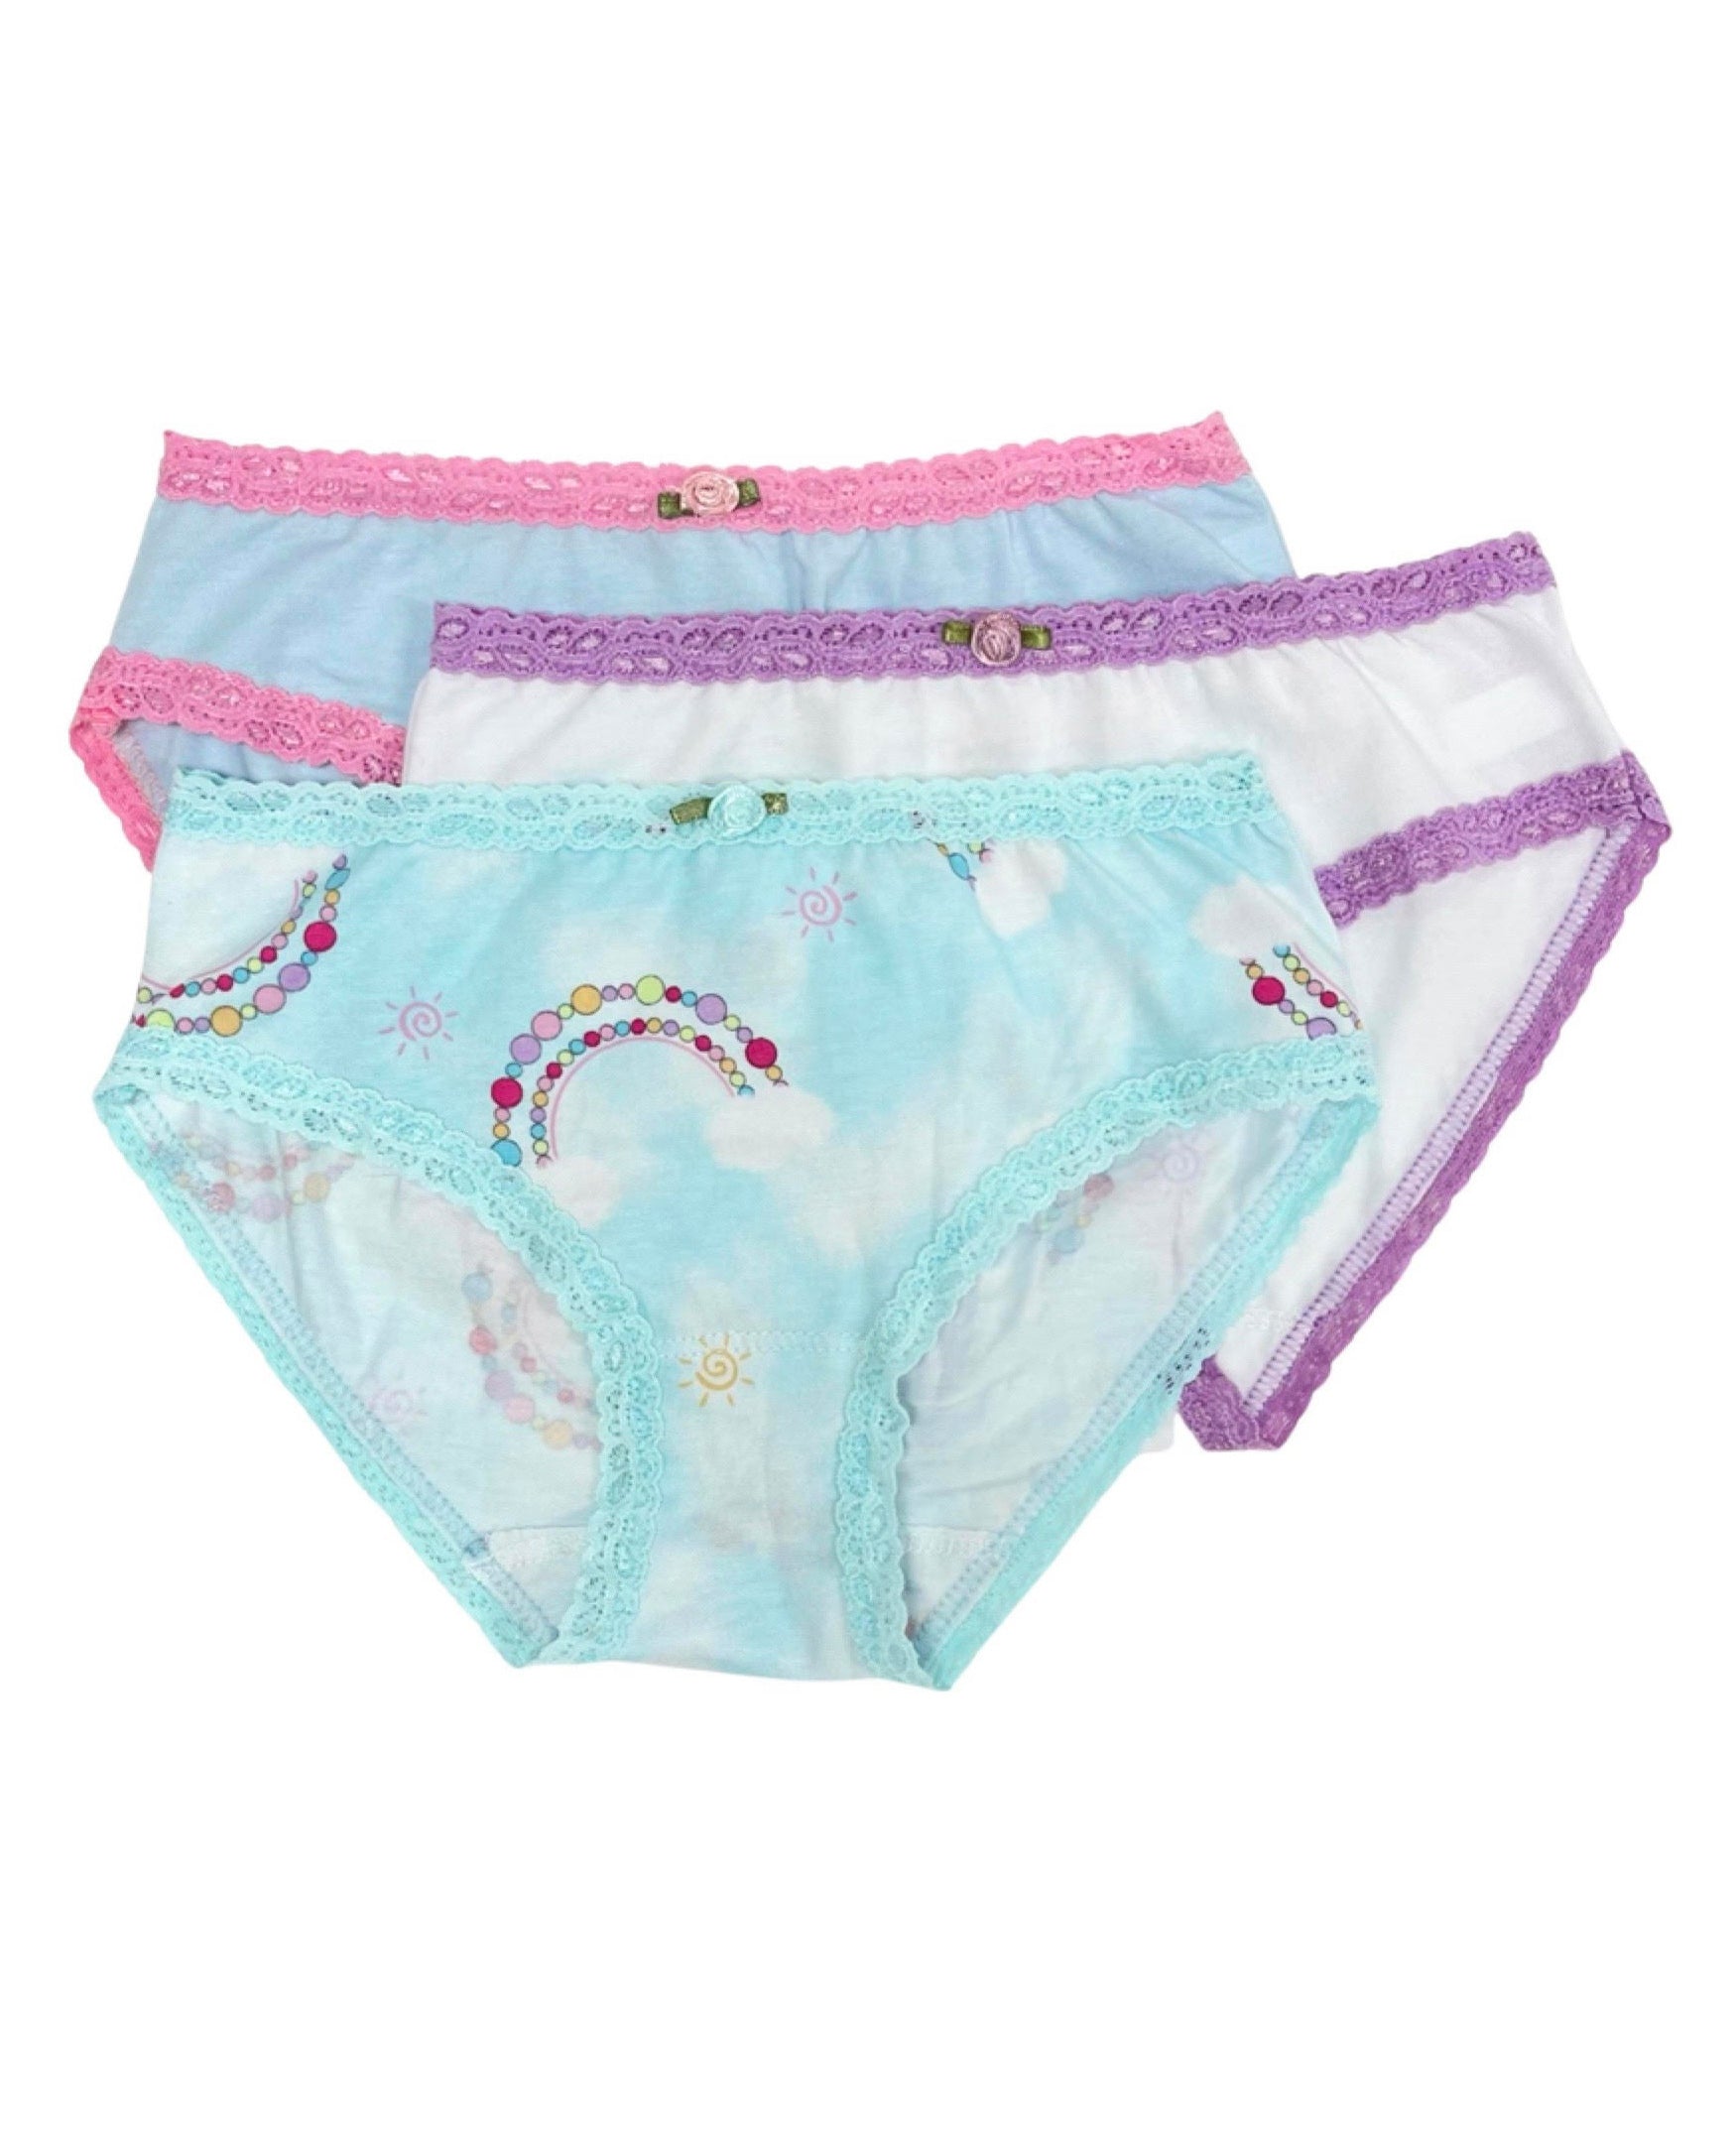 2 pcs of Set Sminie Young Girl Panties Underwear Students Panty